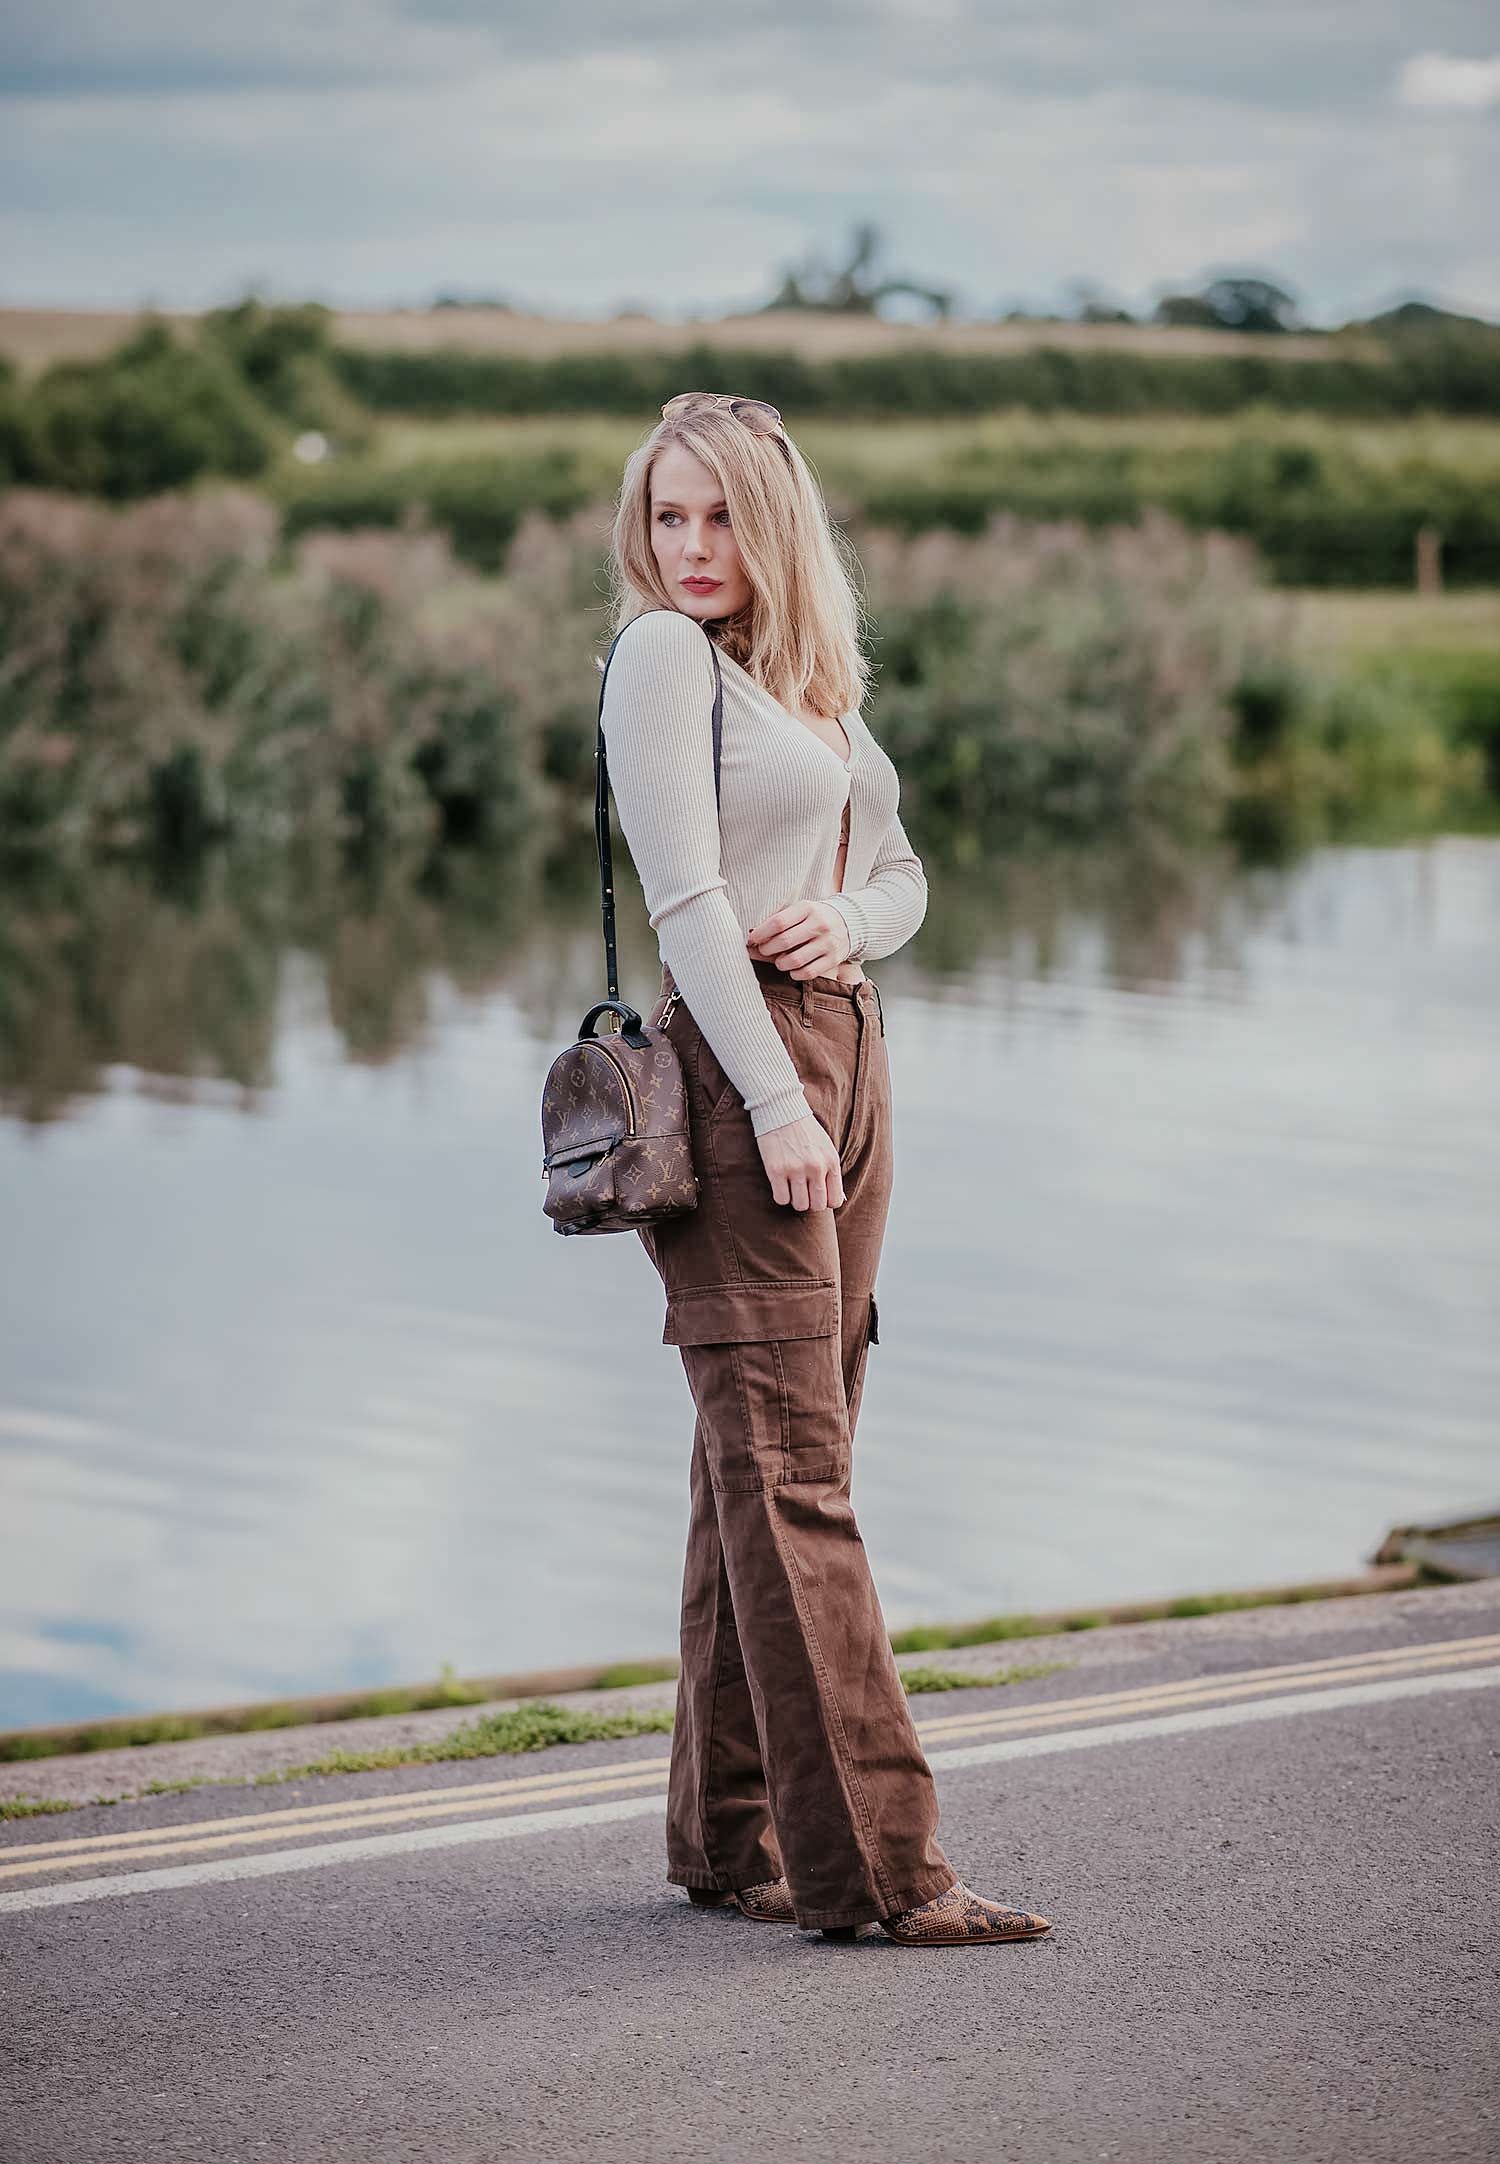 Shop the Attico Cargo Pants Everyone's Wearing During Fashion Month